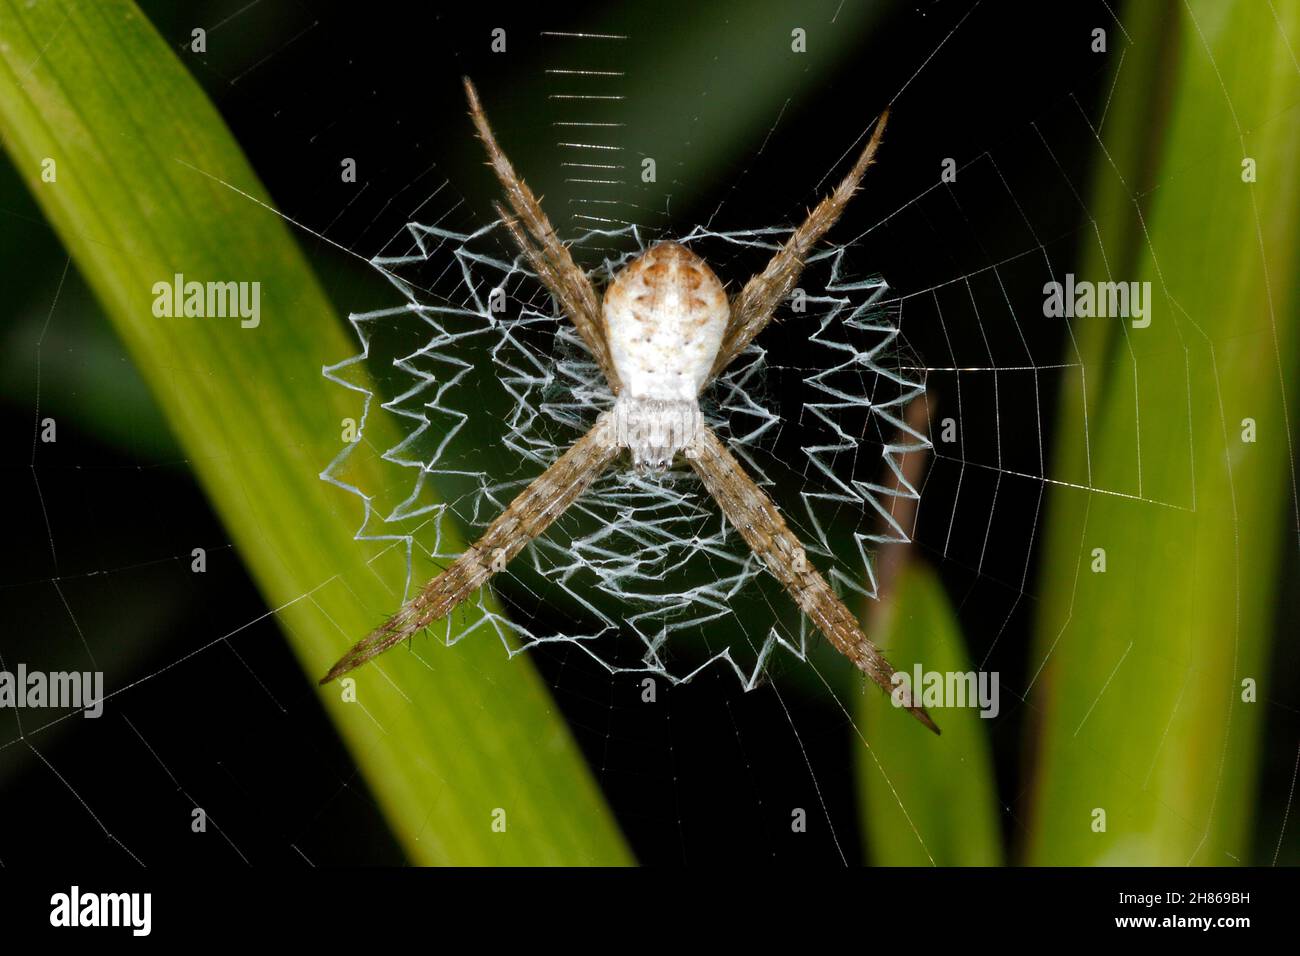 St Andrews Cross Spider, Argiope keyserlingi, is an orb weaver spider from Australia. Young female, showing the cross stabilimentum in her web. Stock Photo